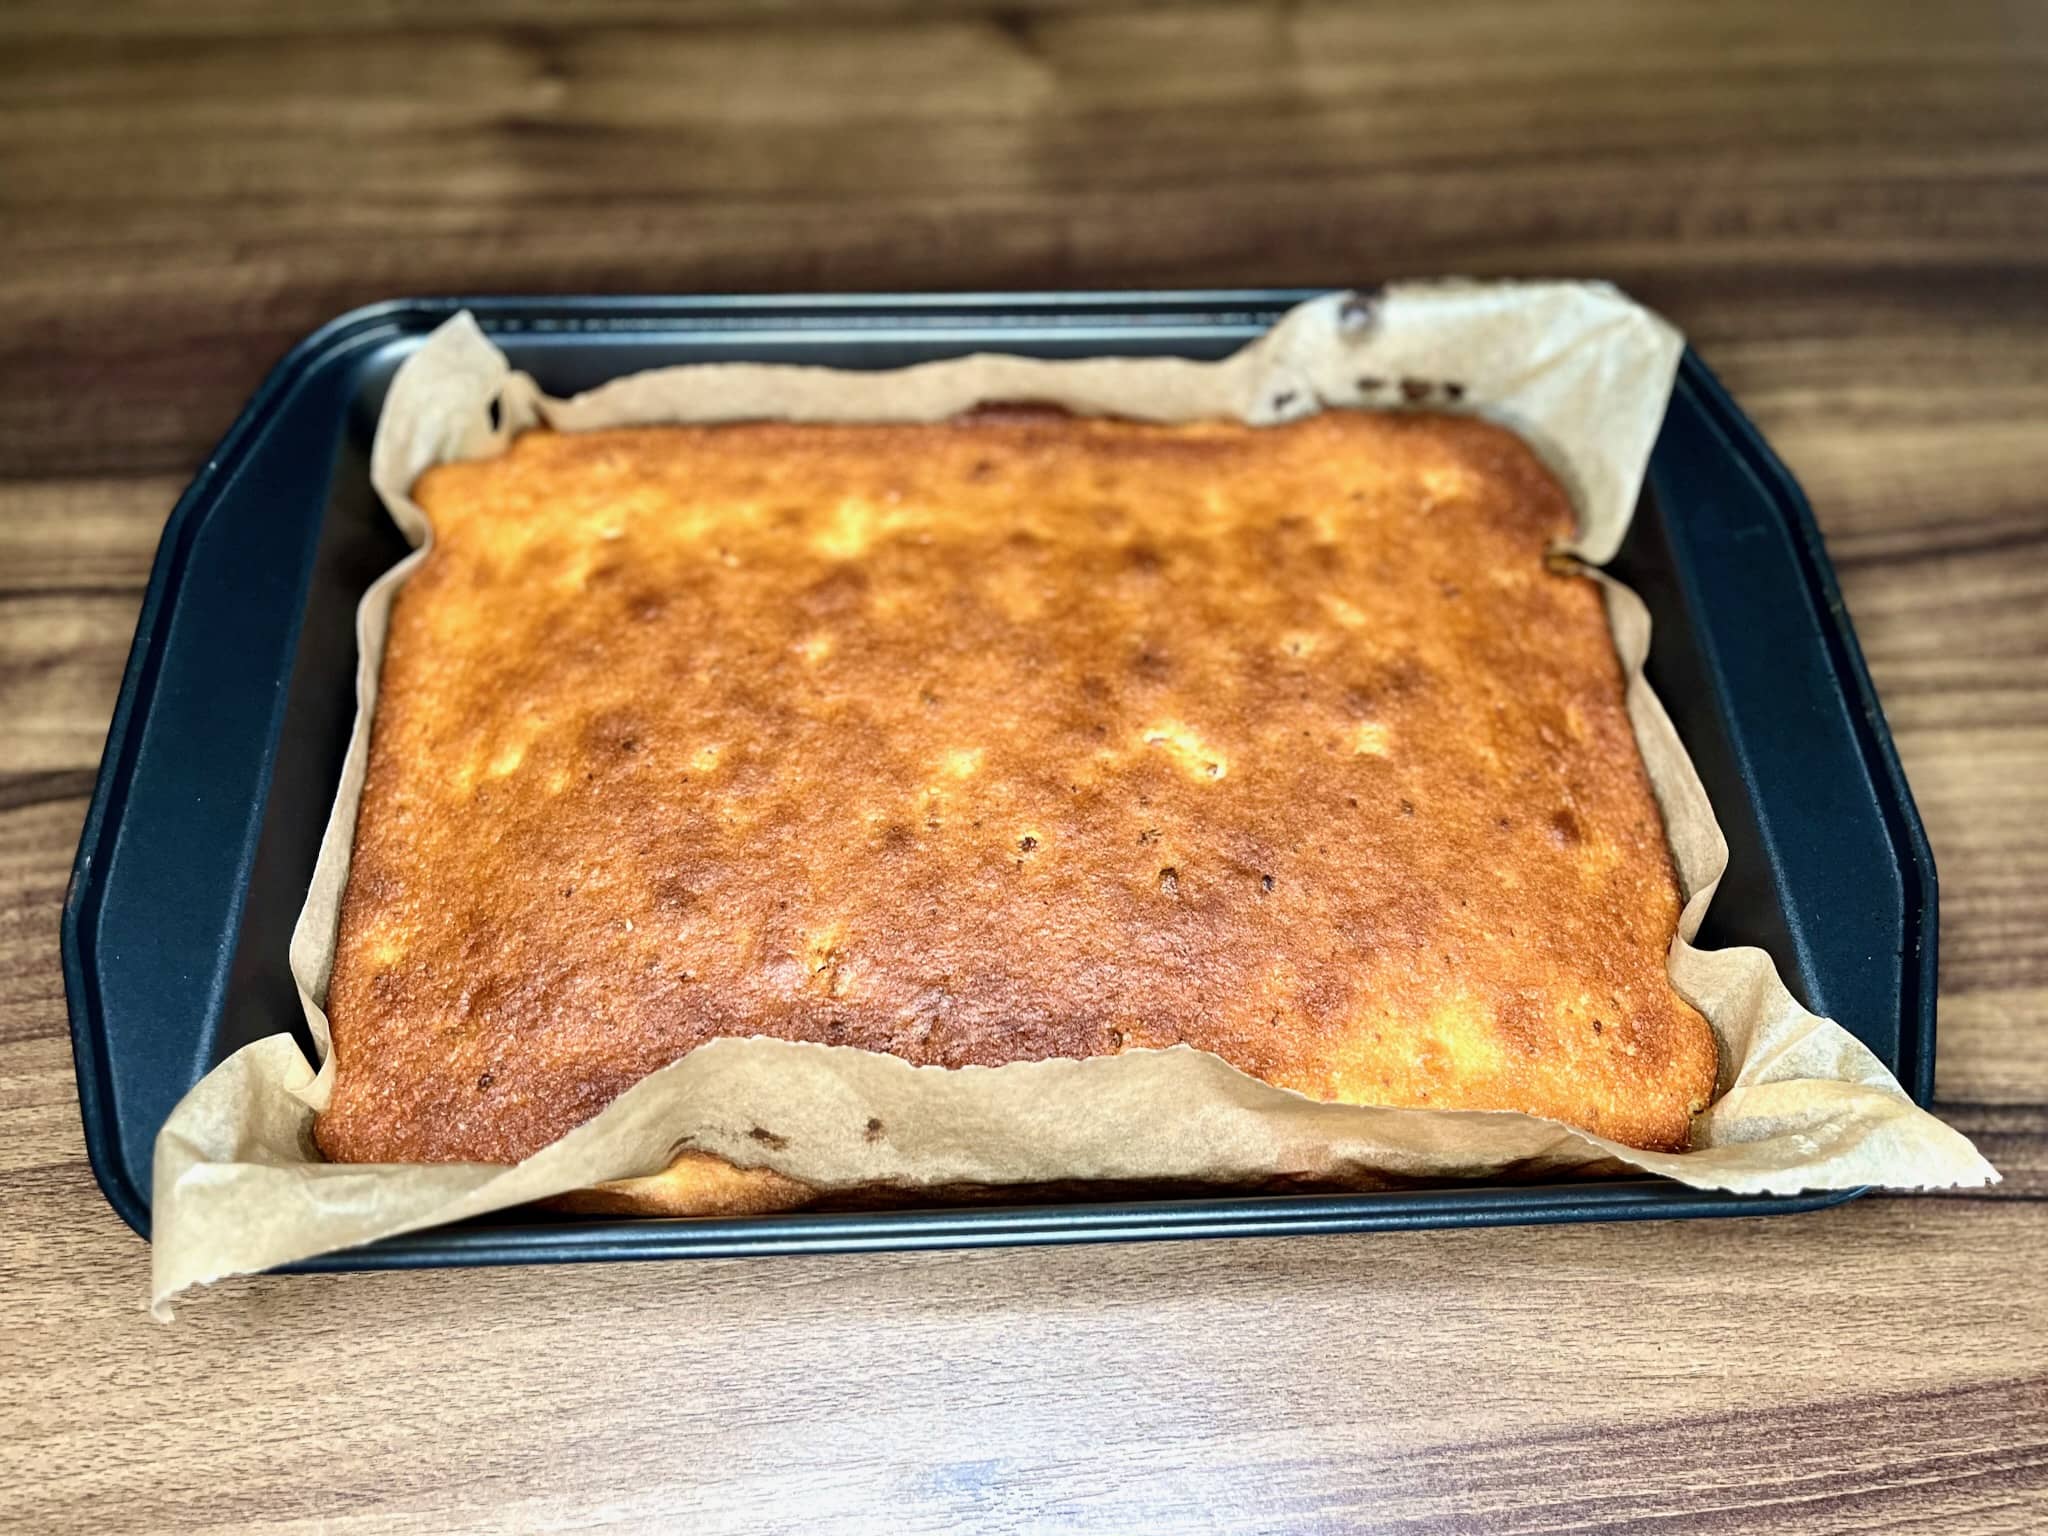 Nicely baked lemon cake cooling down in a baking tray